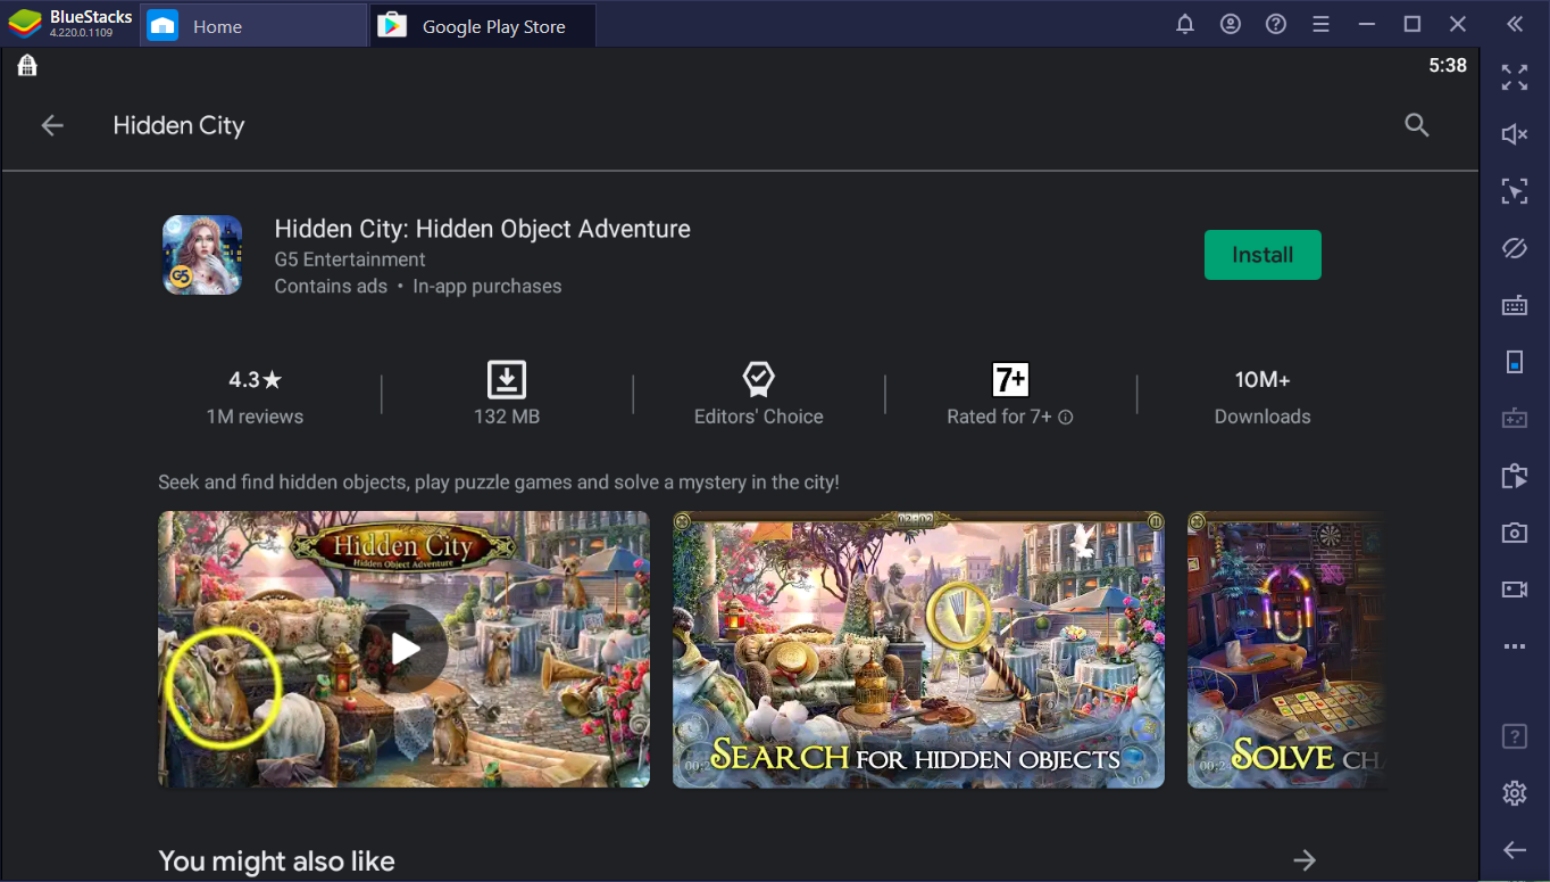 Download Hidden City on PC with BlueStacks